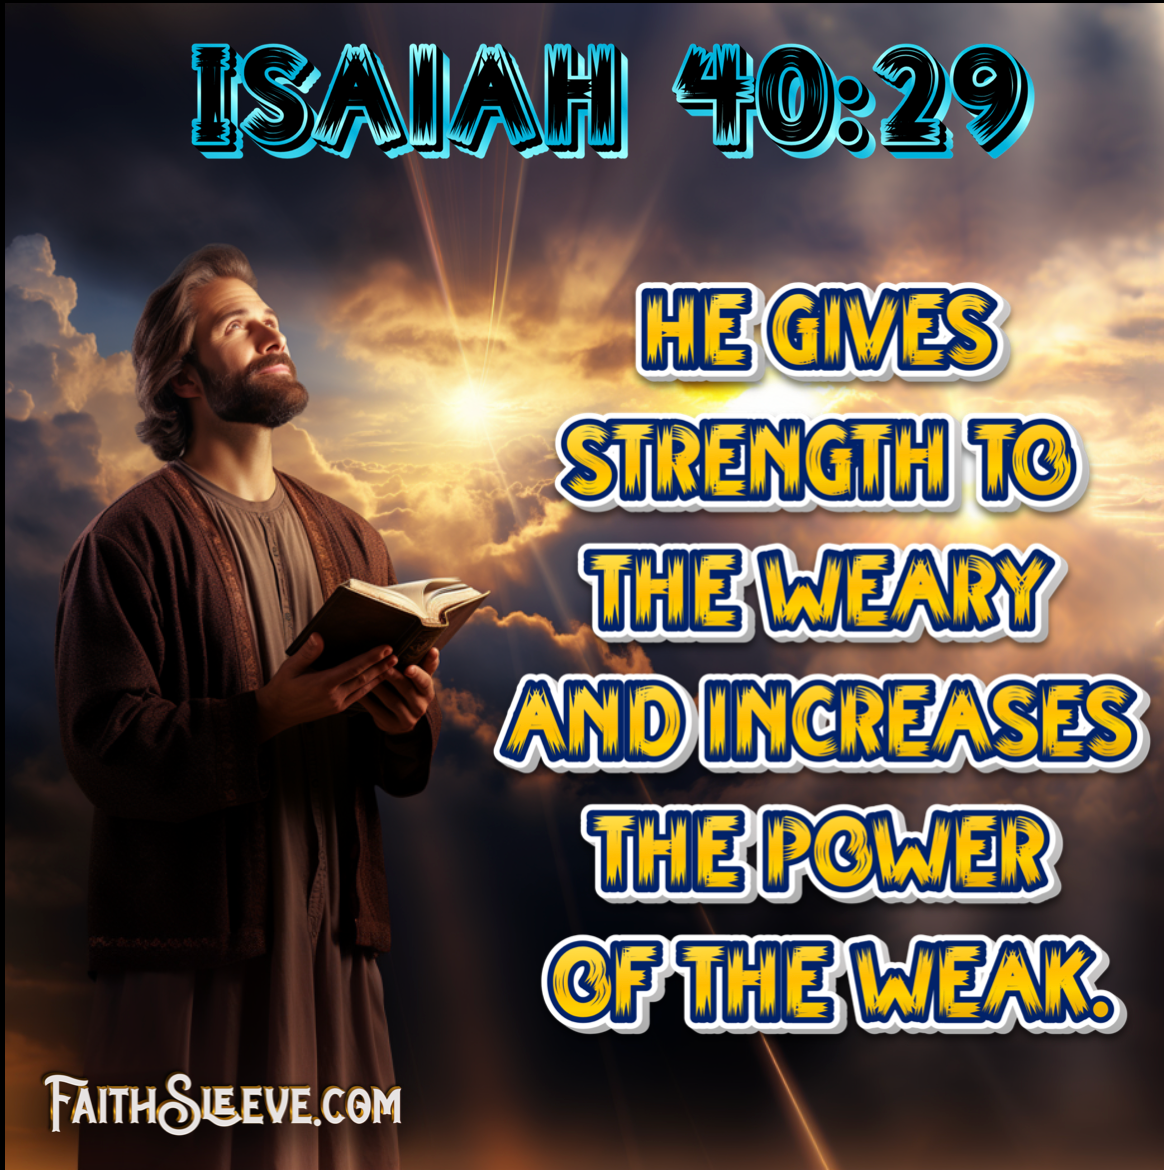 Isaiah 40:29 Bible Verse Shirt. Strength to the Weary. 